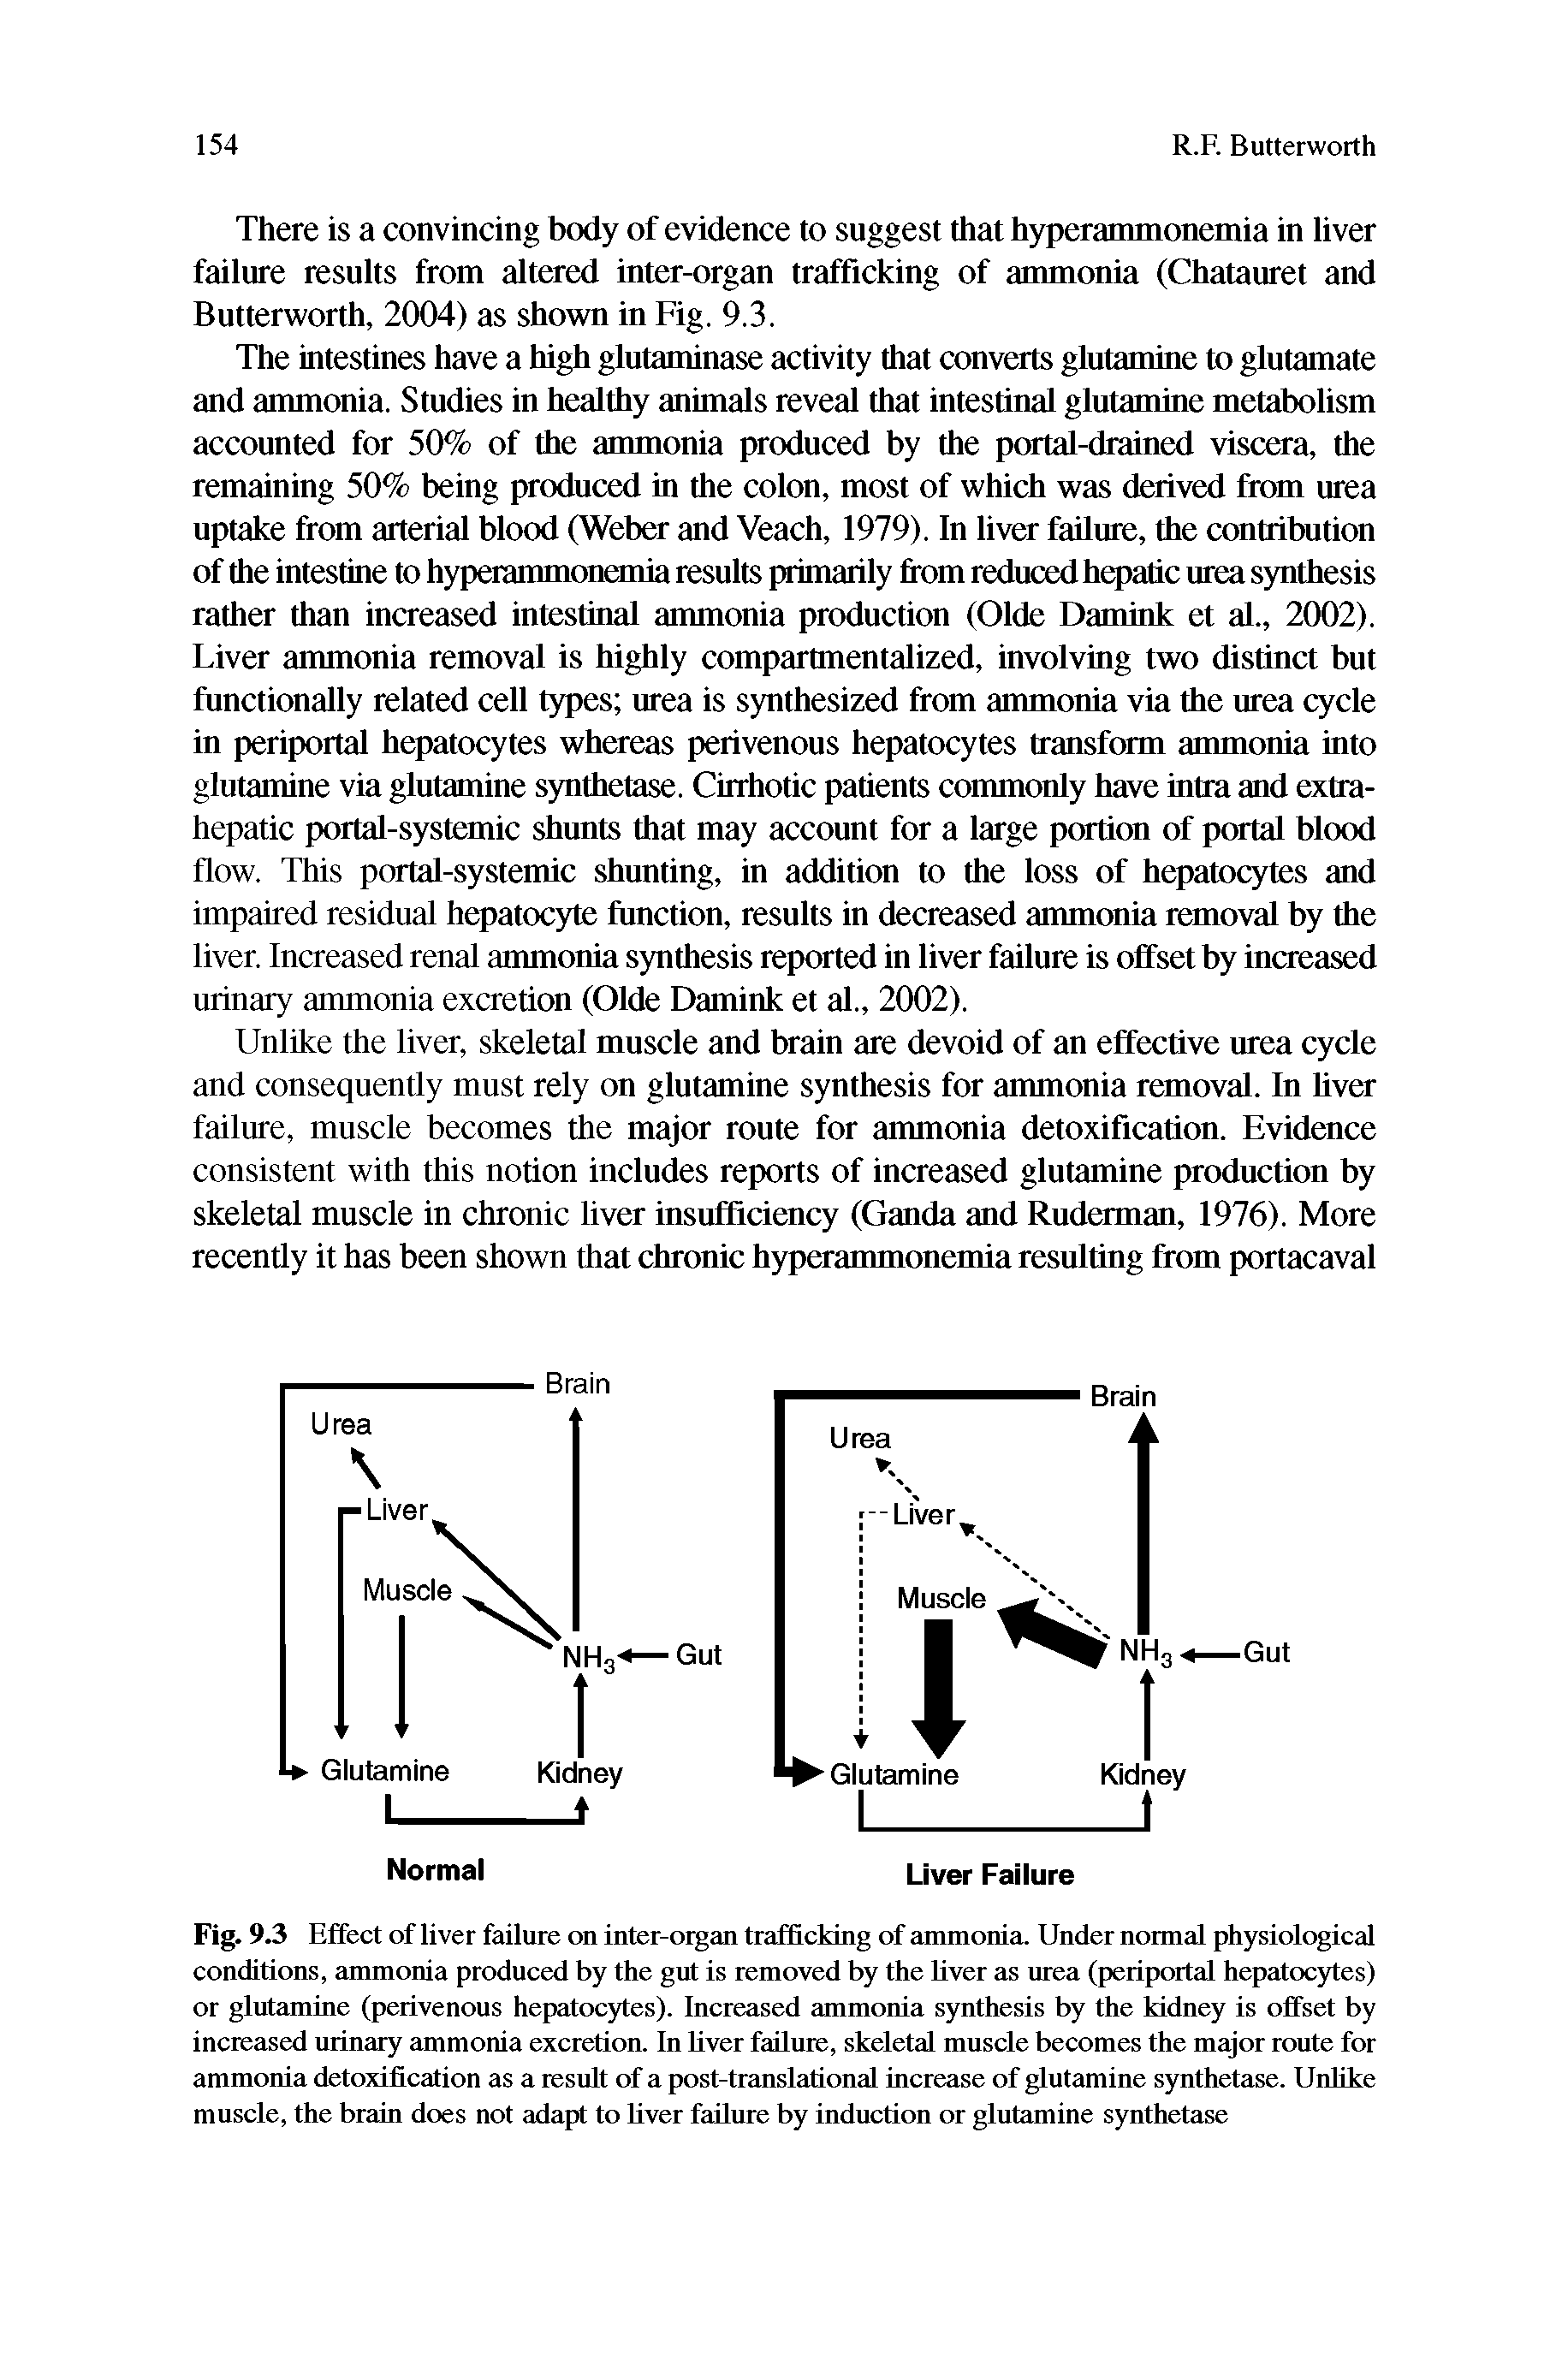 Fig. 9.3 Effect of liver failure on inter-organ trafficking of ammonia. Under normal physiological conditions, ammonia produced by the gut is removed by the liver as urea (periportal hepatocytes) or glutamine (perivenous hepatocytes). Increased ammonia synthesis by the kidney is offset by increased urinary ammonia excretion. In liver failure, skeletal muscle becomes the major route for ammonia detoxification as a result of a post-translational increase of glutamine synthetase. Unlike muscle, the brain does not adapt to liver failure by induction or glutamine synthetase...